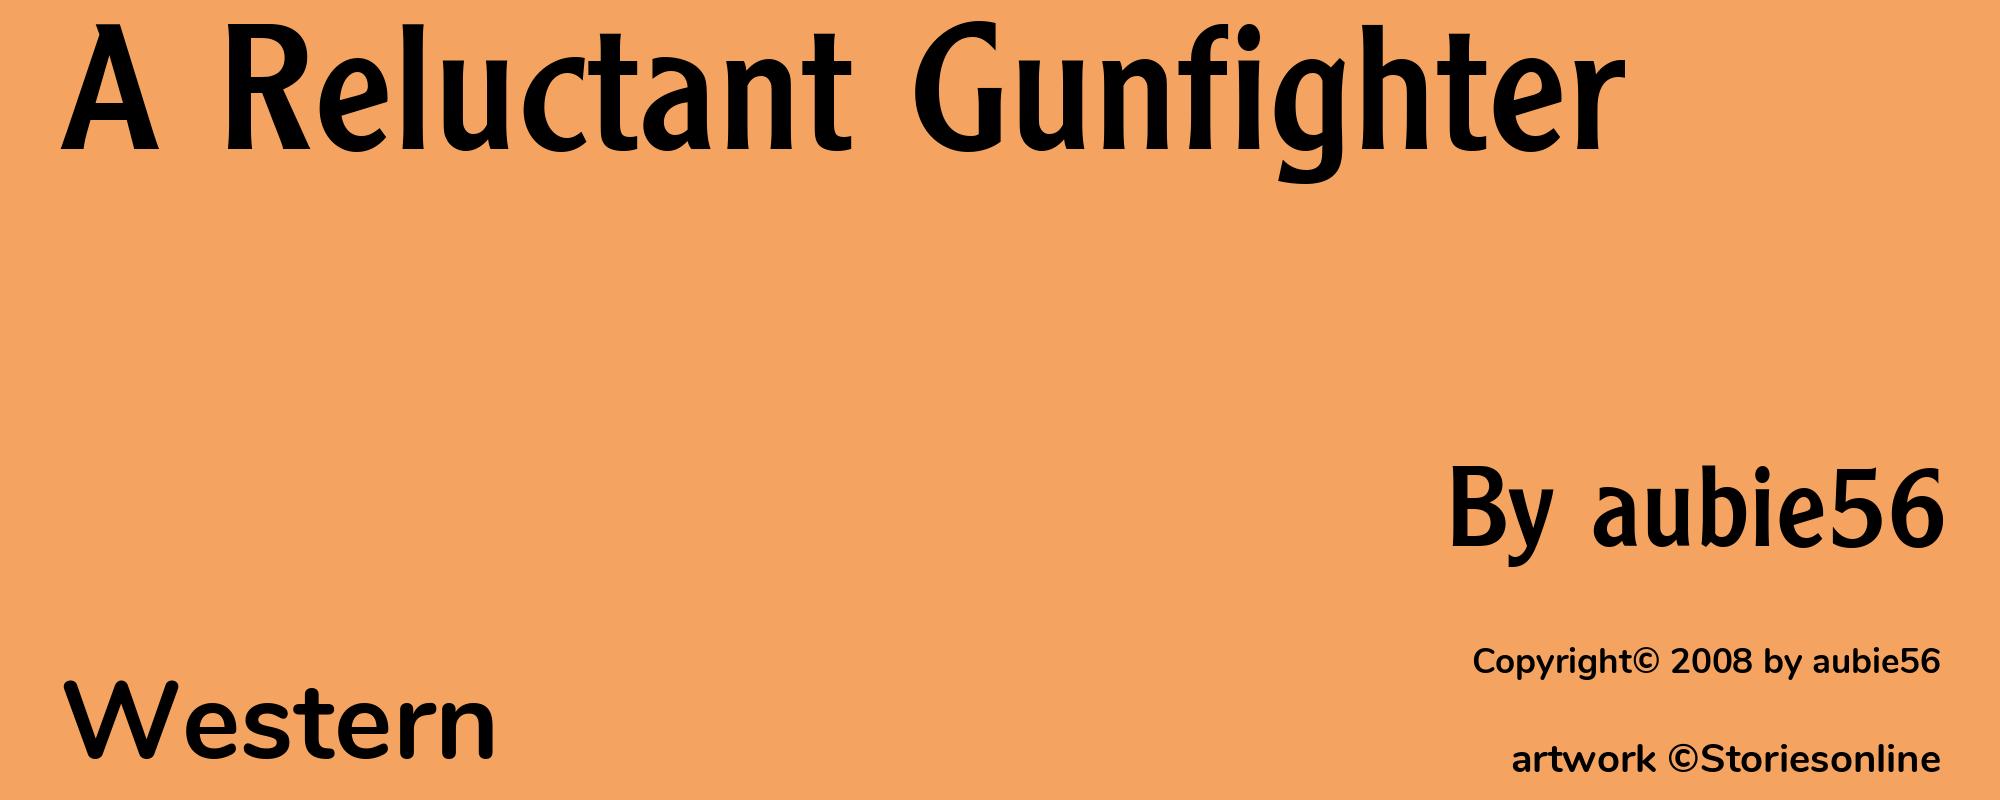 A Reluctant Gunfighter - Cover